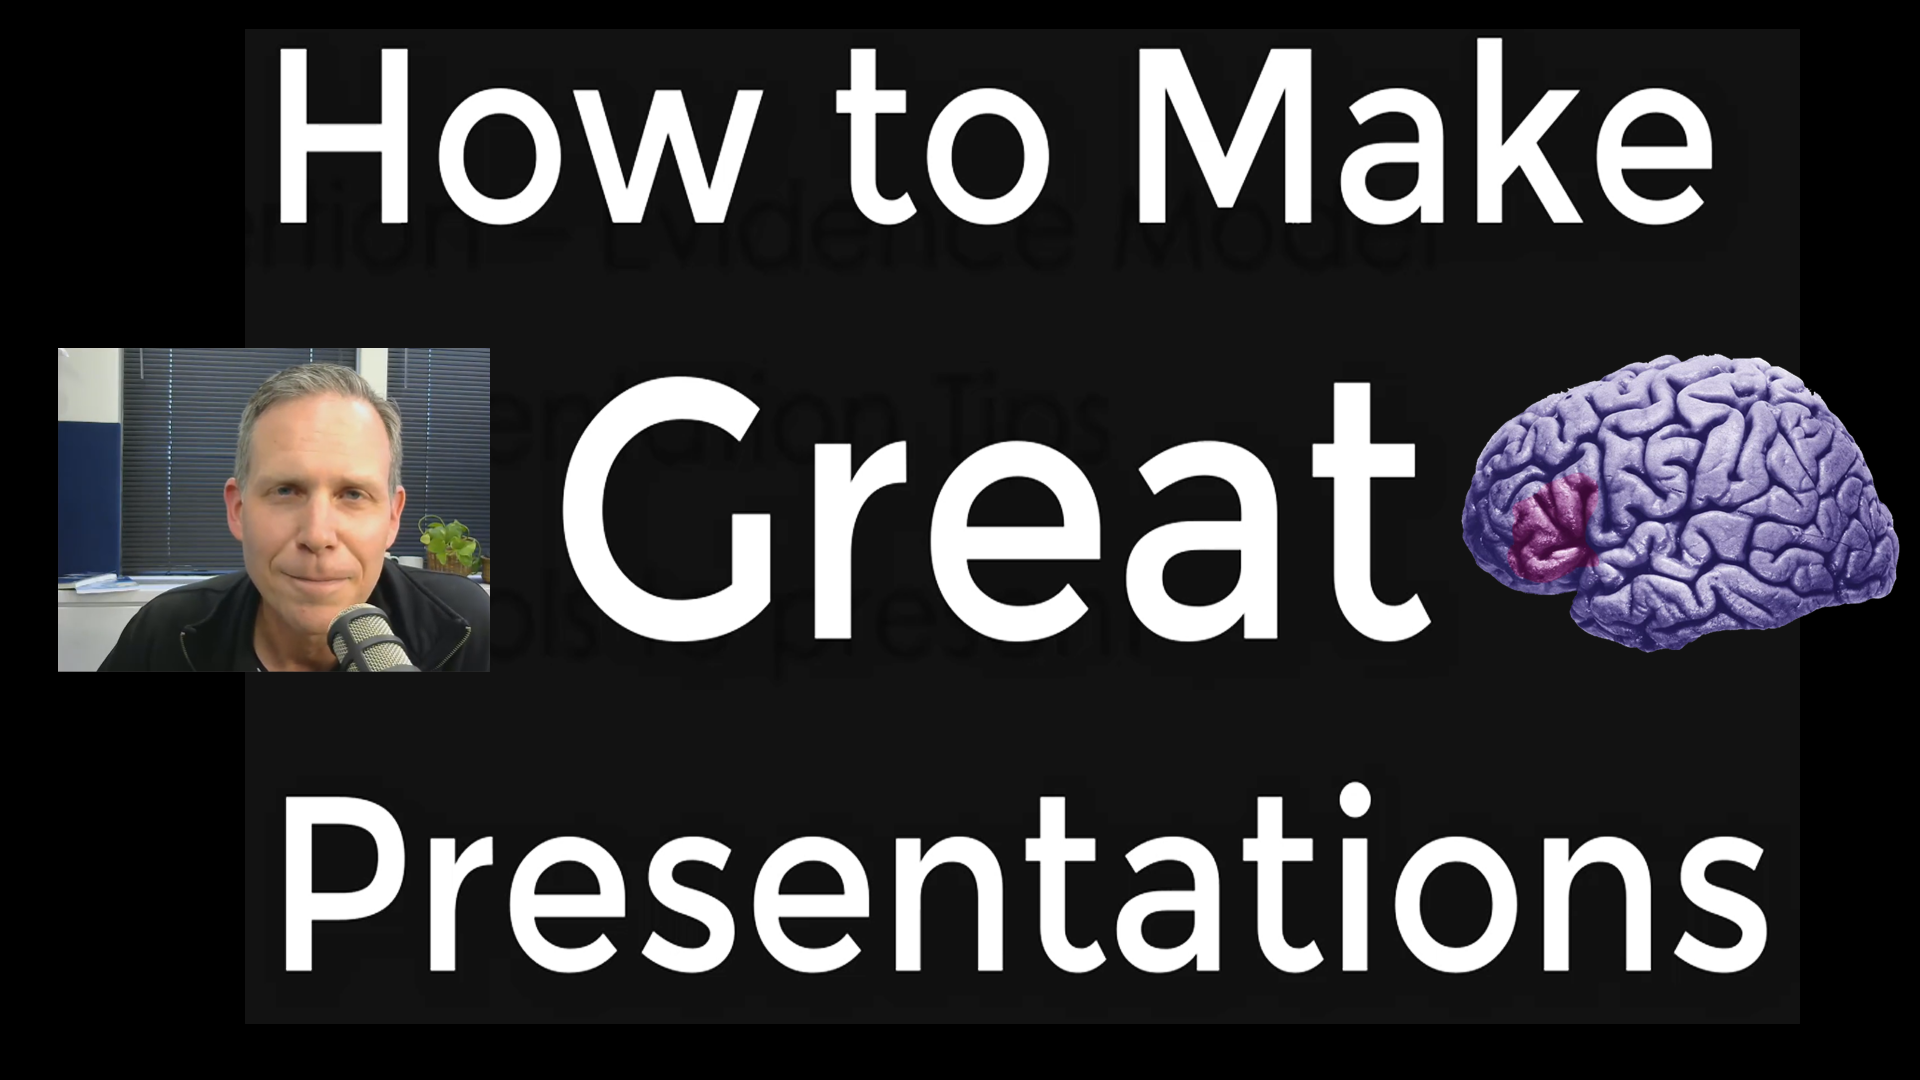 is a great presentation